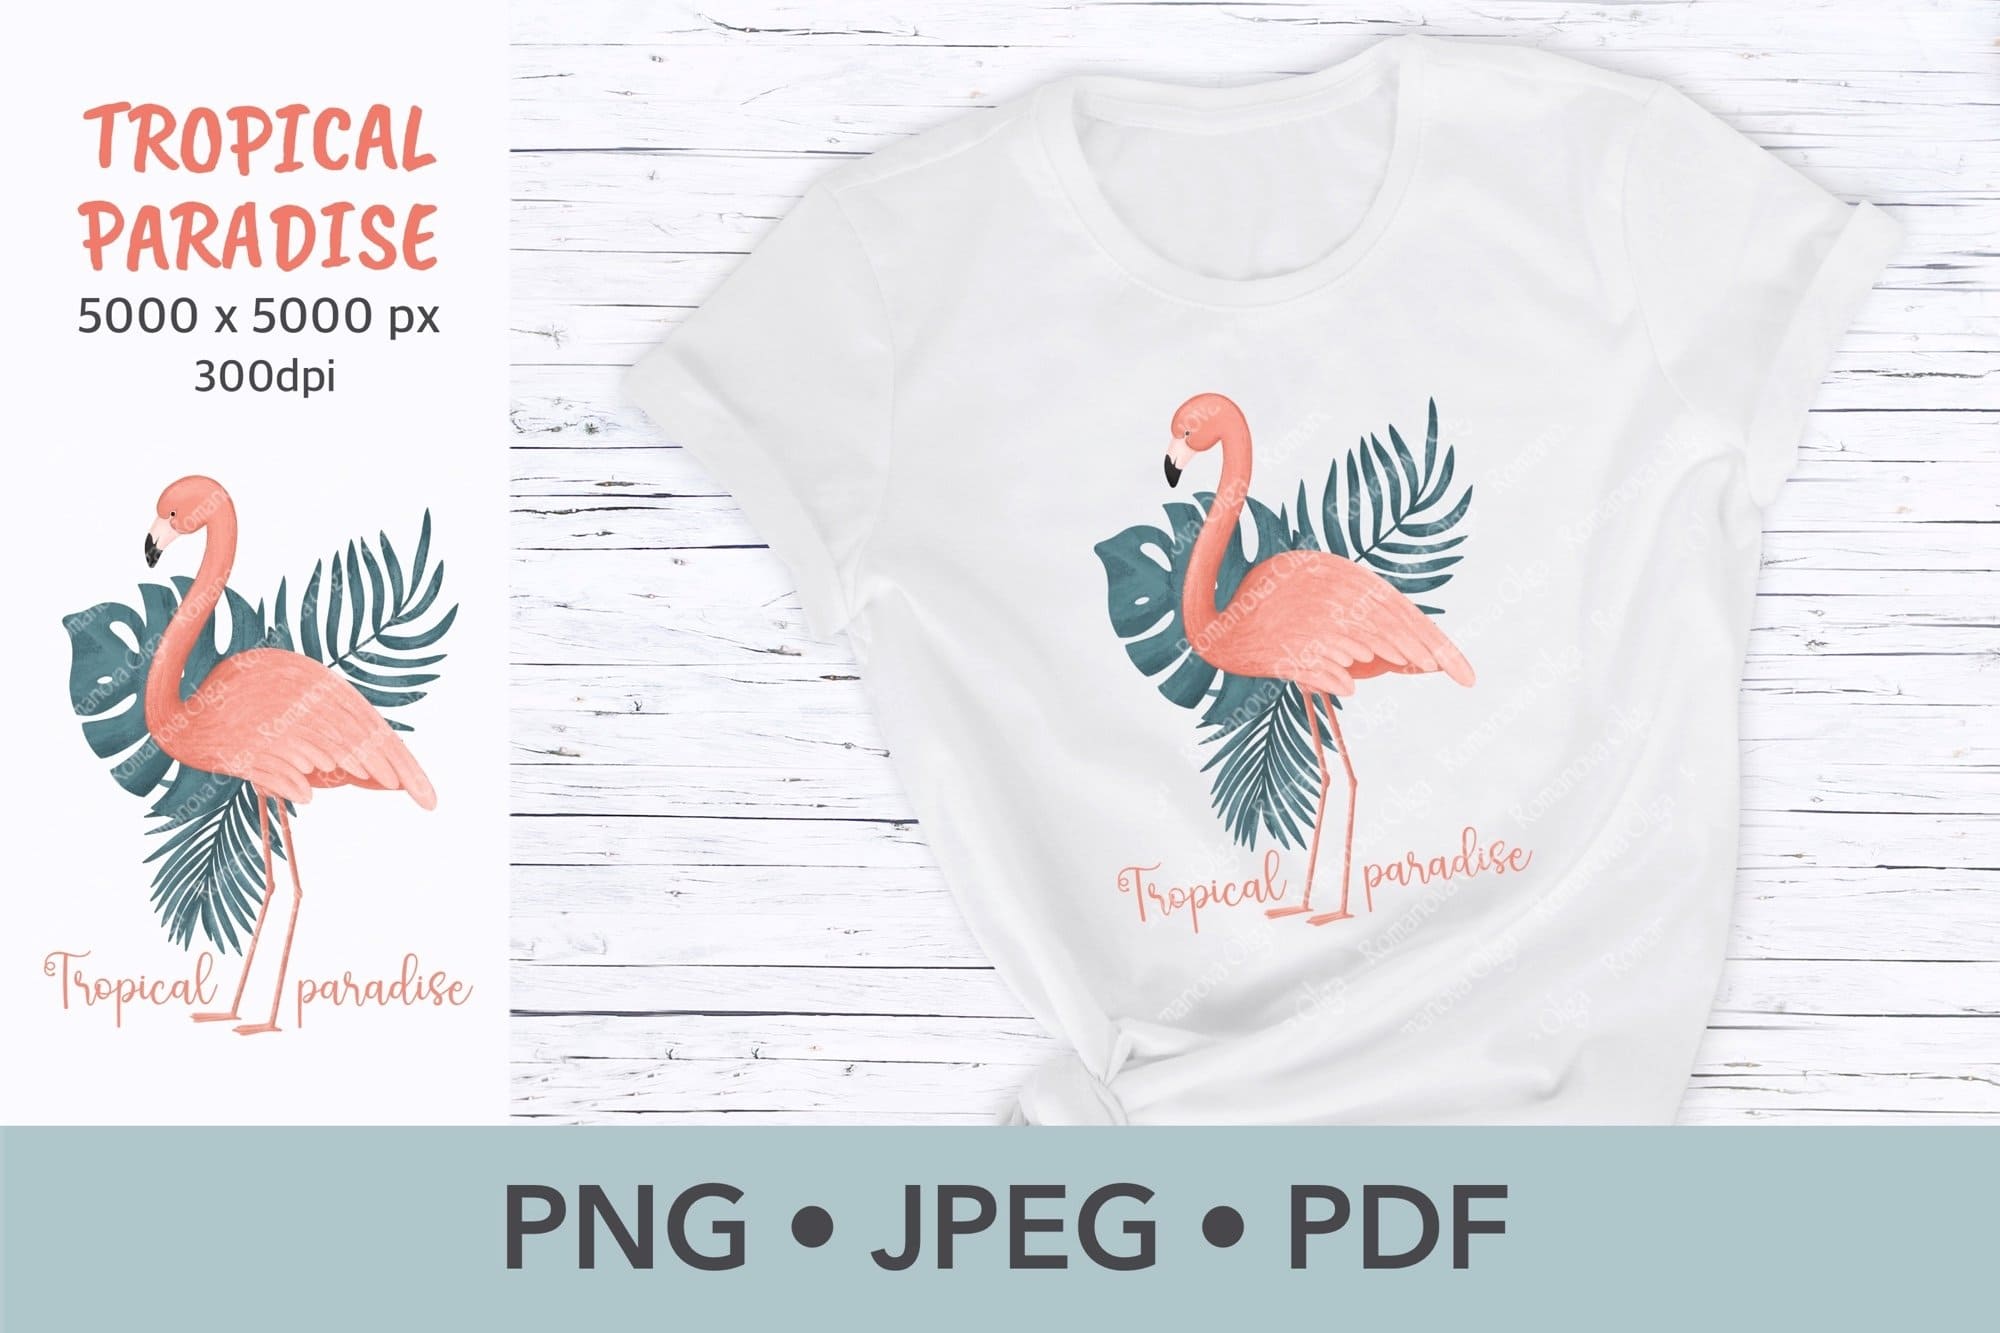 A pink flamingo with long feathers on its wings is depicted on a white T-shirt.